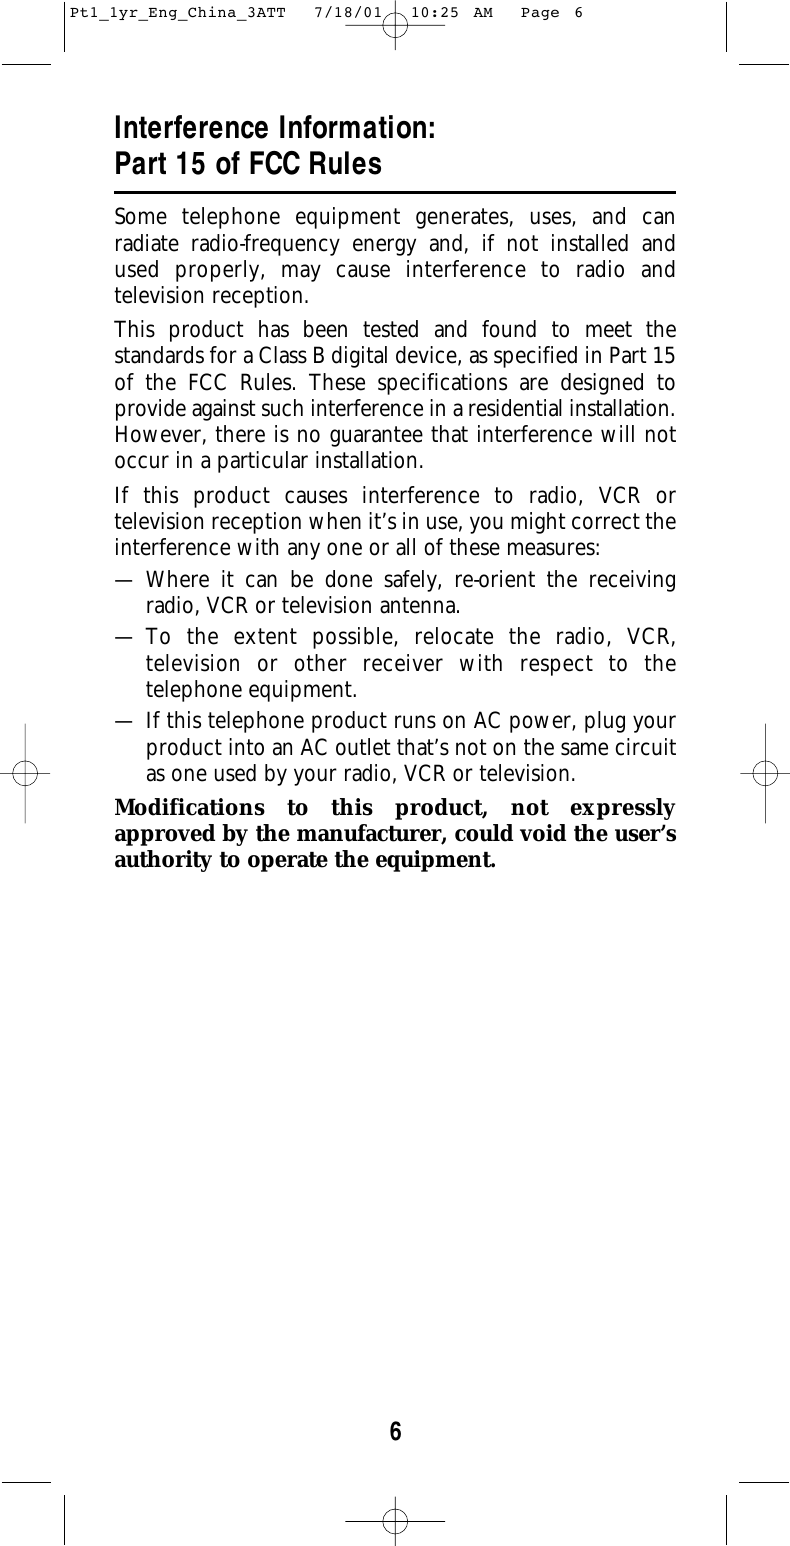 6Interference Information:Part 15 of FCC RulesSome telephone equipment generates, uses, and can radiate radio-frequency energy and, if not installed and used properly, may cause interference to radio and television reception.This product has been tested and found to meet the standards for a Class B digital device, as specified in Part 15of the FCC Rules. These specifications are designed to provide against such interference in a residential installation.However, there is no guarantee that interference will notoccur in a particular installation.If this product causes interference to radio, VCR or television reception when it’s in use, you might correct theinterference with any one or all of these measures:— Where it can be done safely, re-orient the receiving radio, VCR or television antenna.— To the extent possible, relocate the radio, VCR,television or other receiver with respect to thetelephone equipment.— If this telephone product runs on AC power, plug yourproduct into an AC outlet that’s not on the same circuitas one used by your radio, VCR or television.Modifications to this product, not expresslyapproved by the manufacturer, could void the user’sauthority to operate the equipment.Pt1_1yr_Eng_China_3ATT  7/18/01  10:25 AM  Page 6